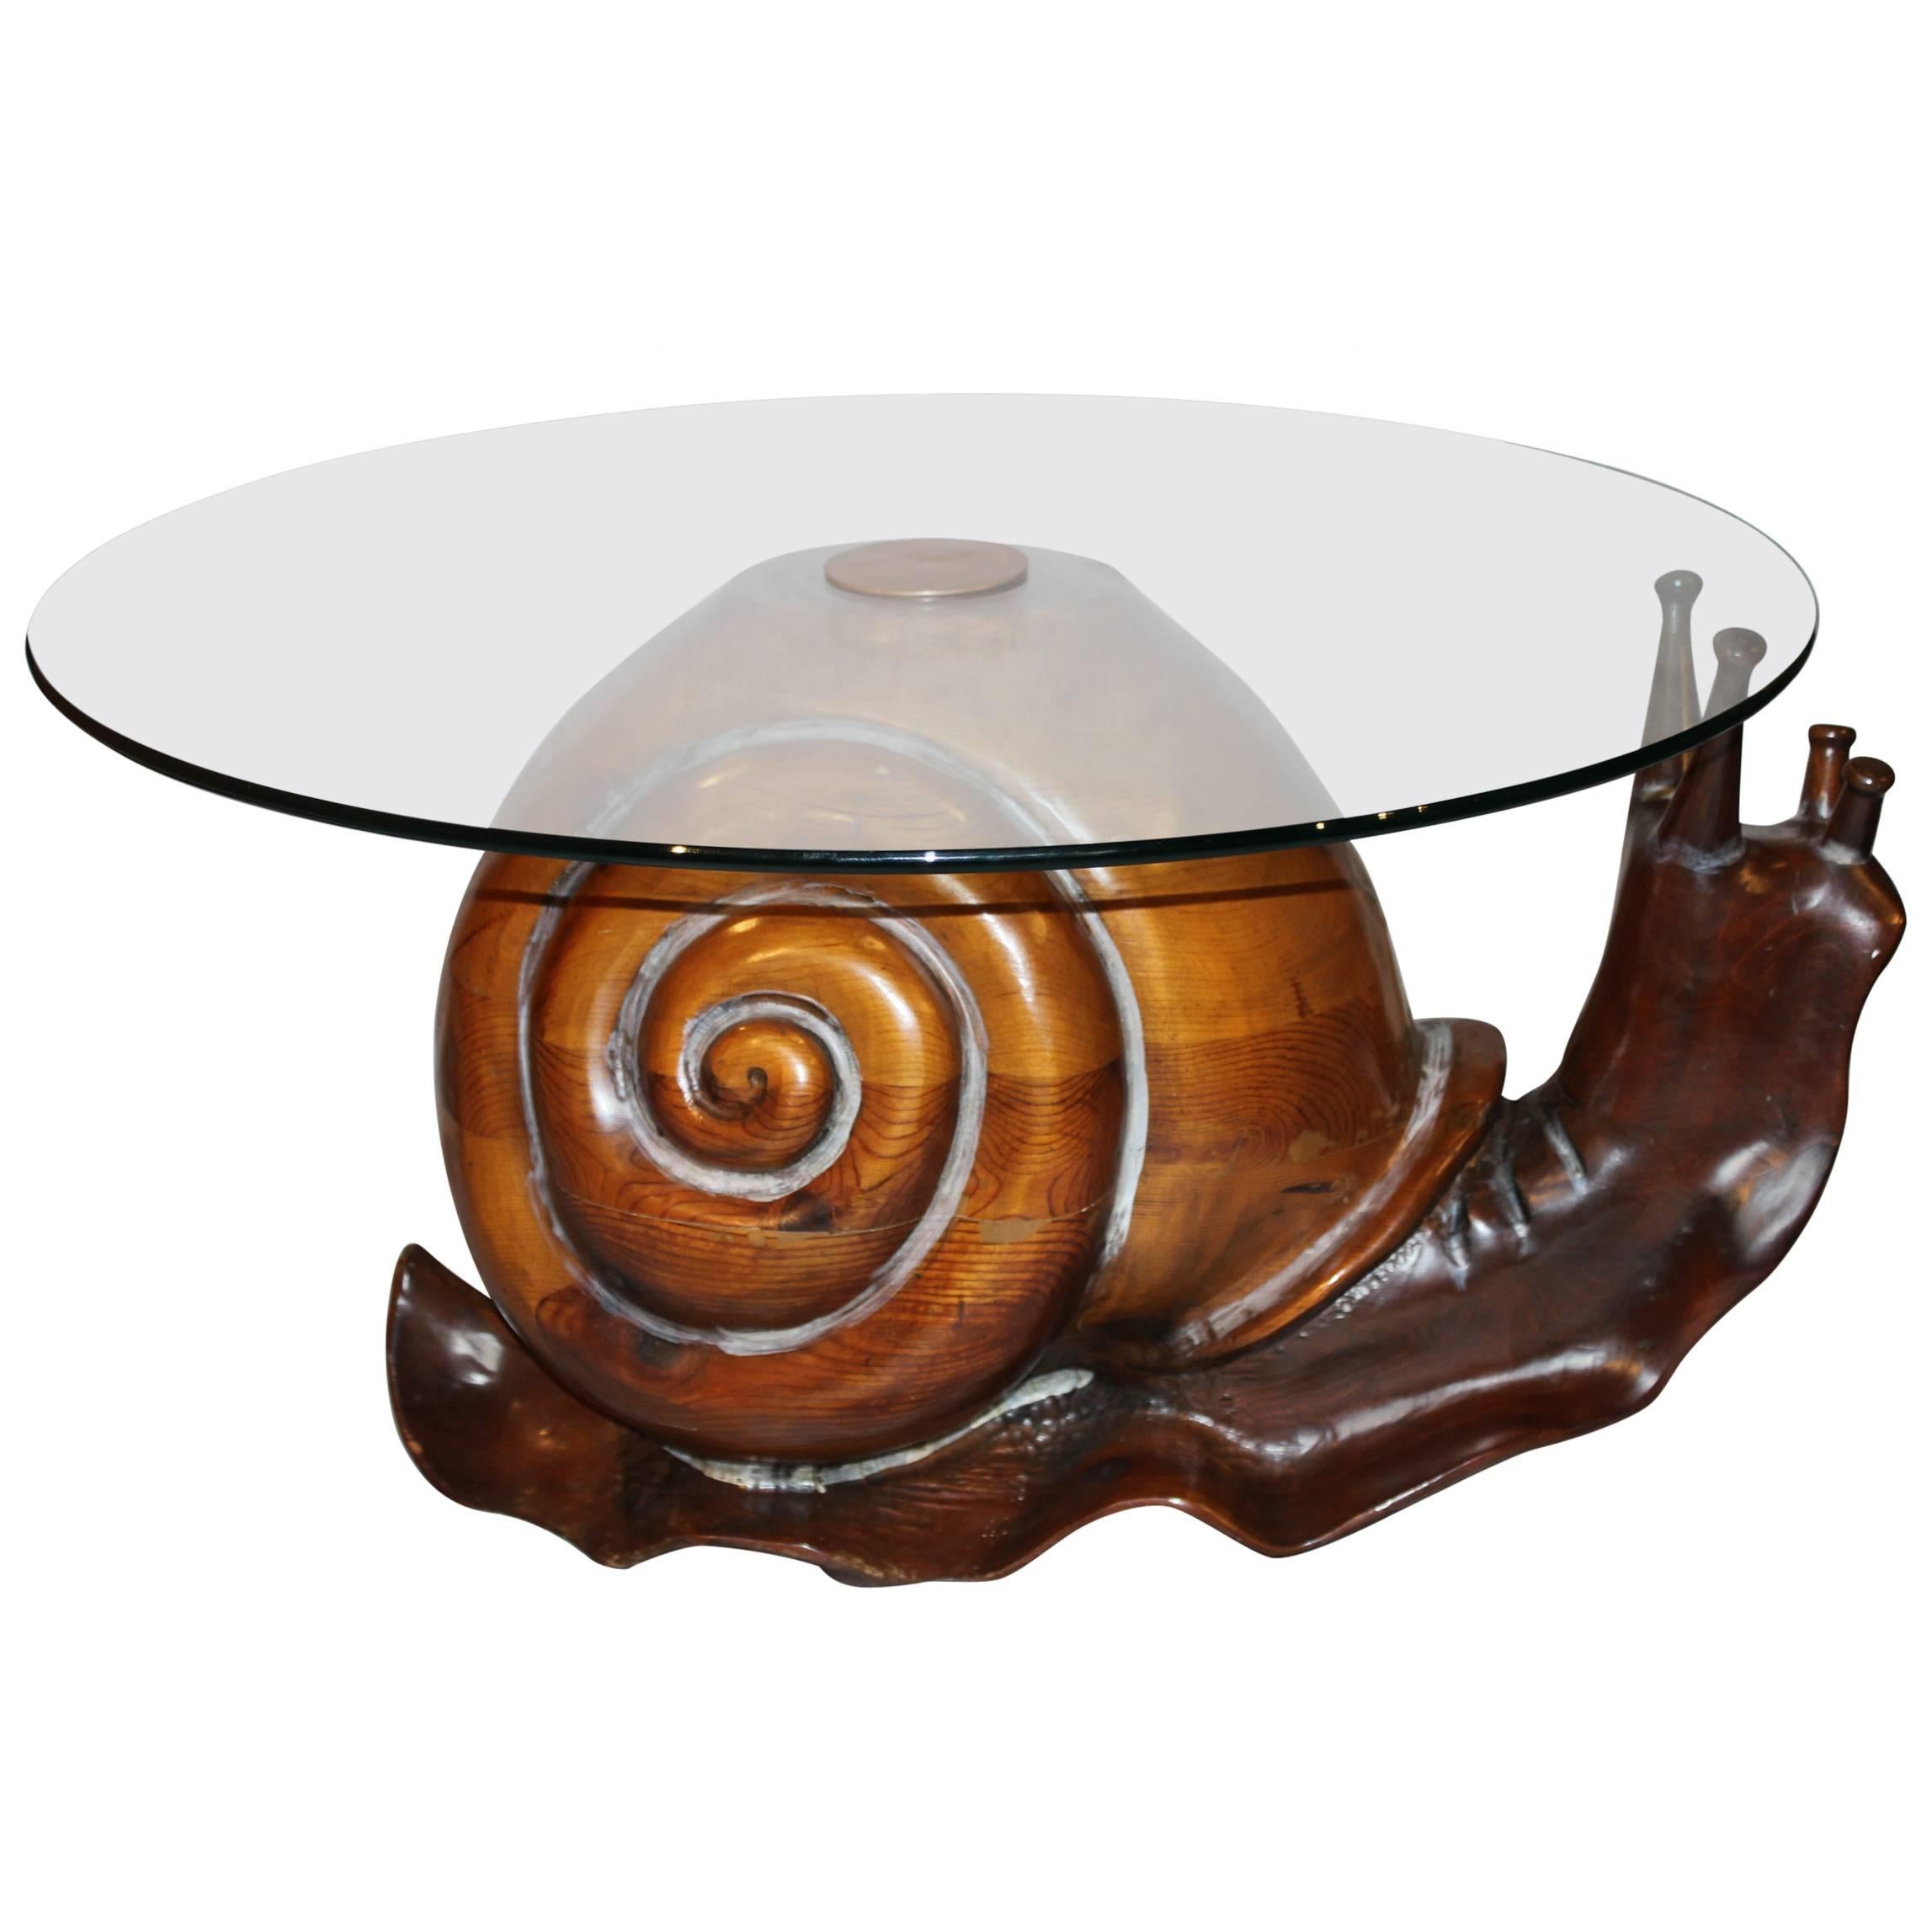 Federico Armijo Glass Top Carved Snail Table